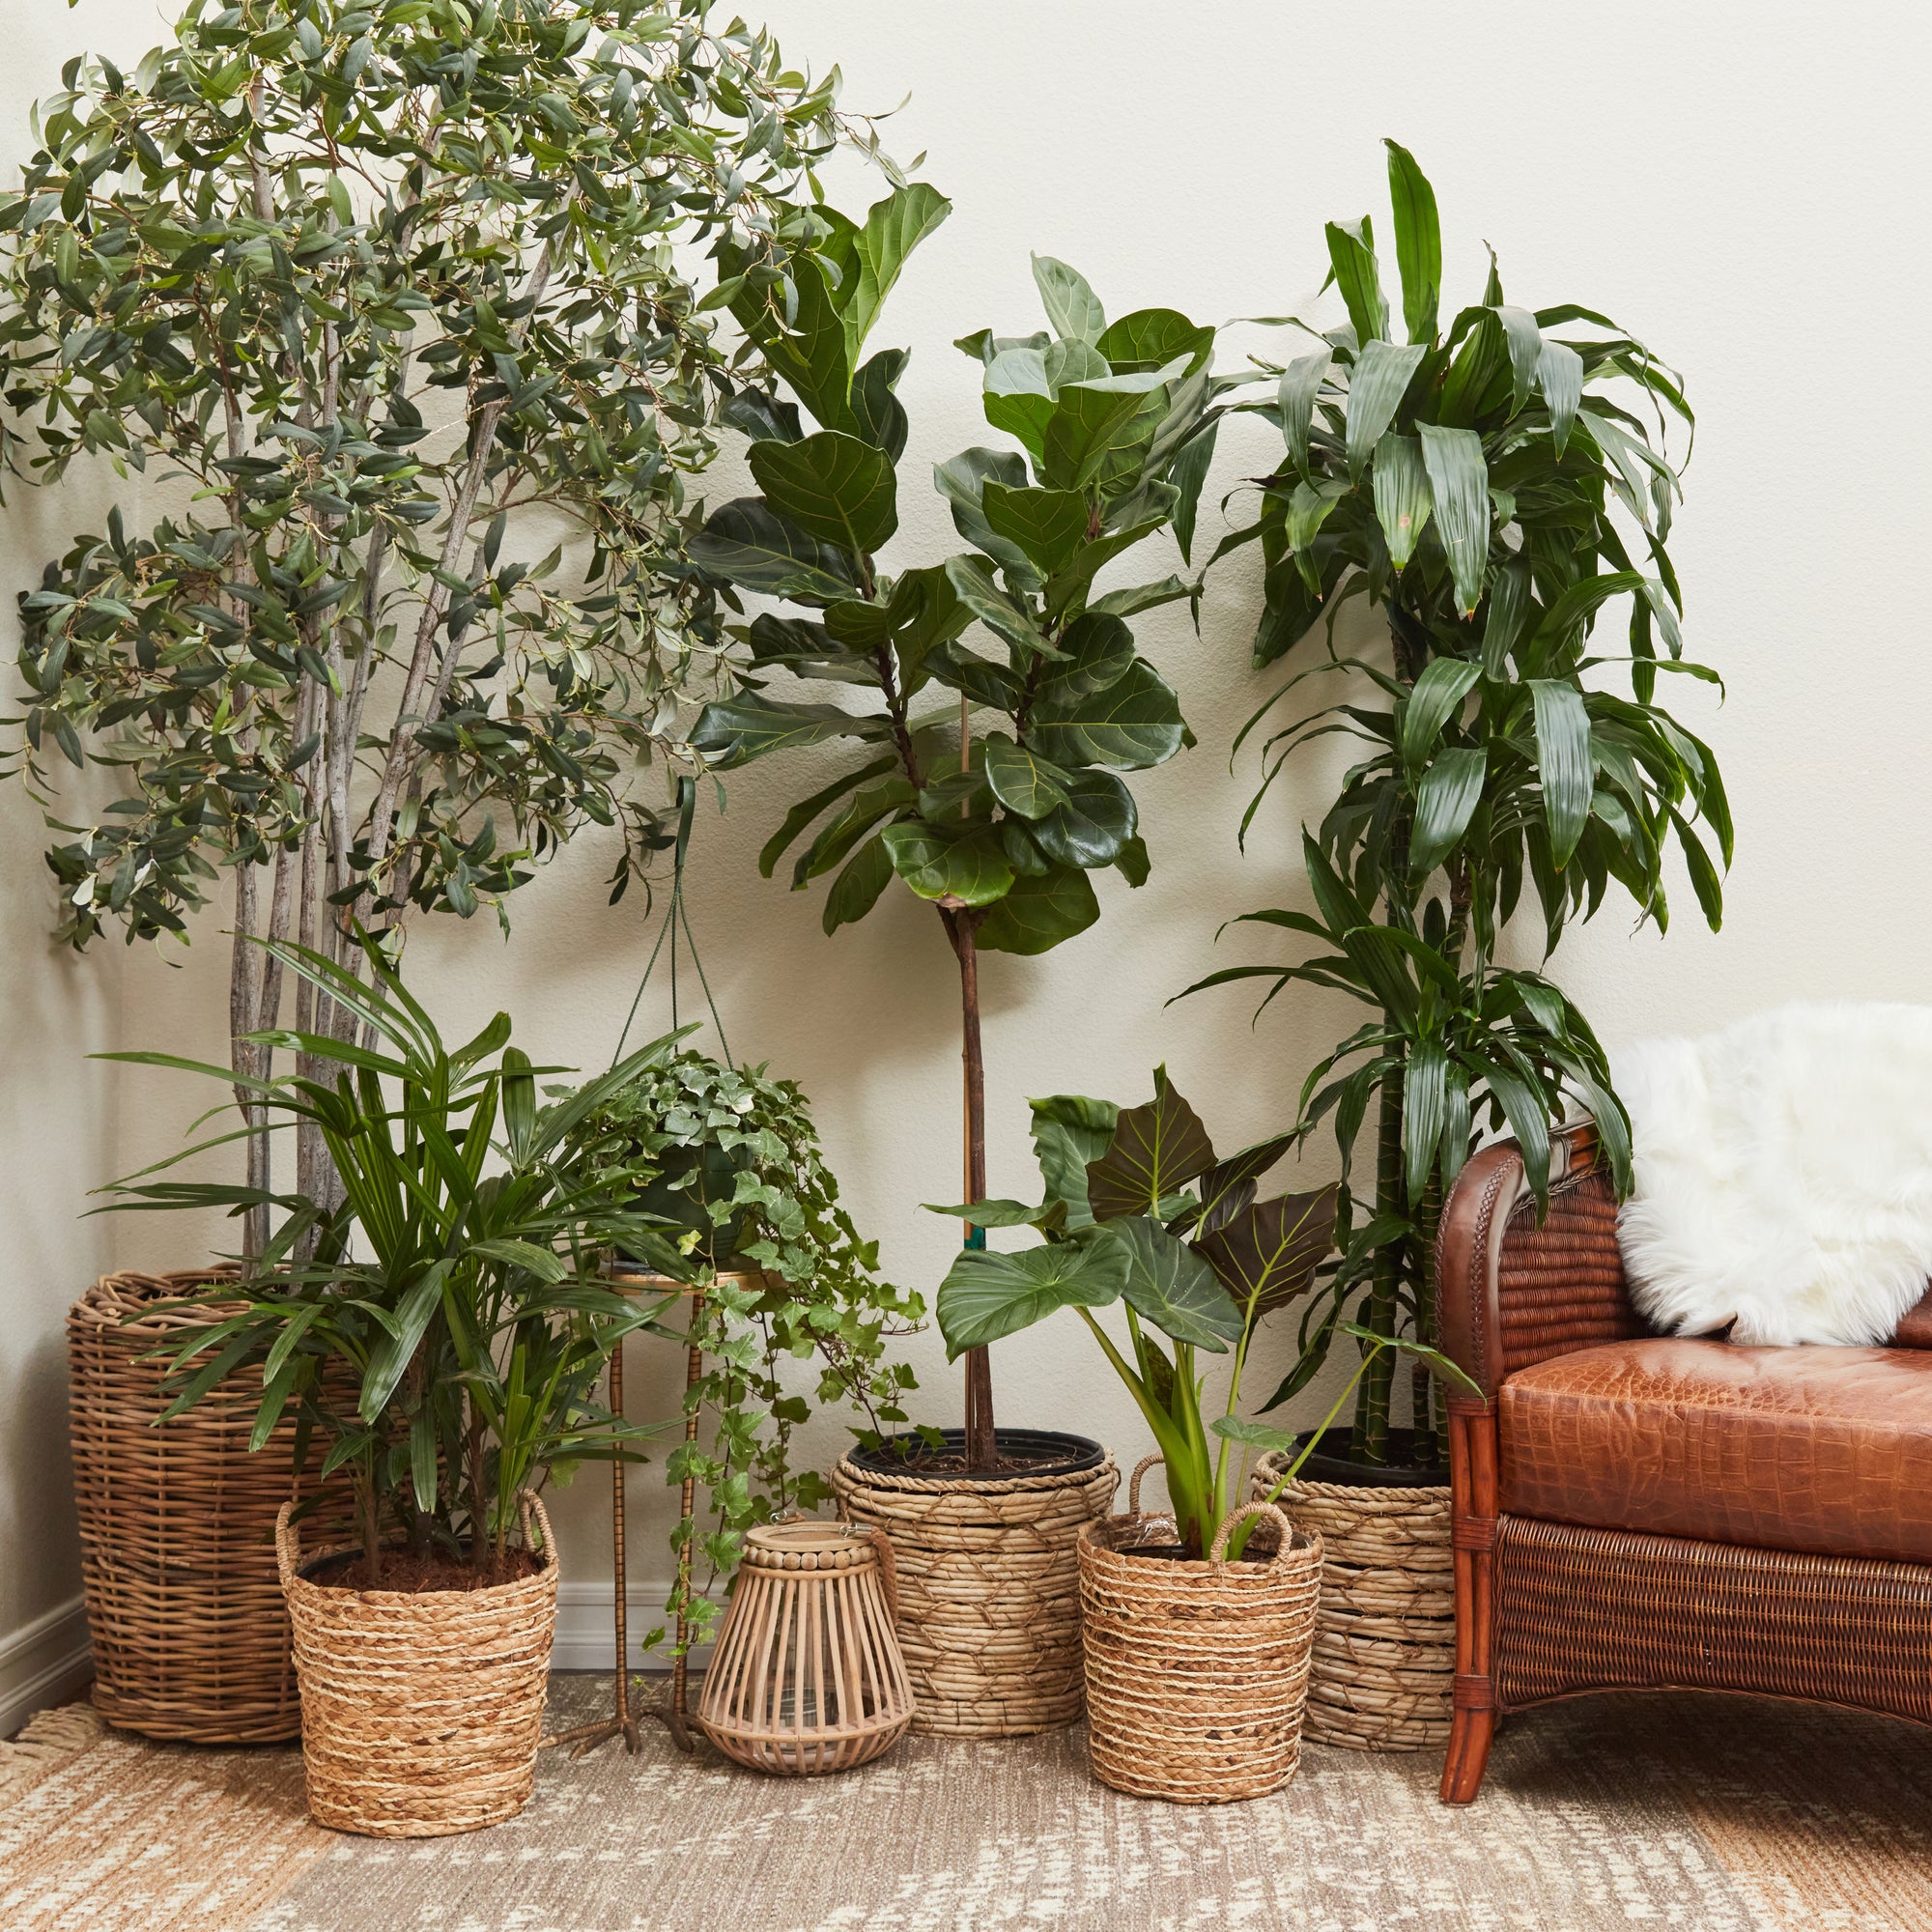 How Many Plants Does it Take Per Room to Reduce Stress?